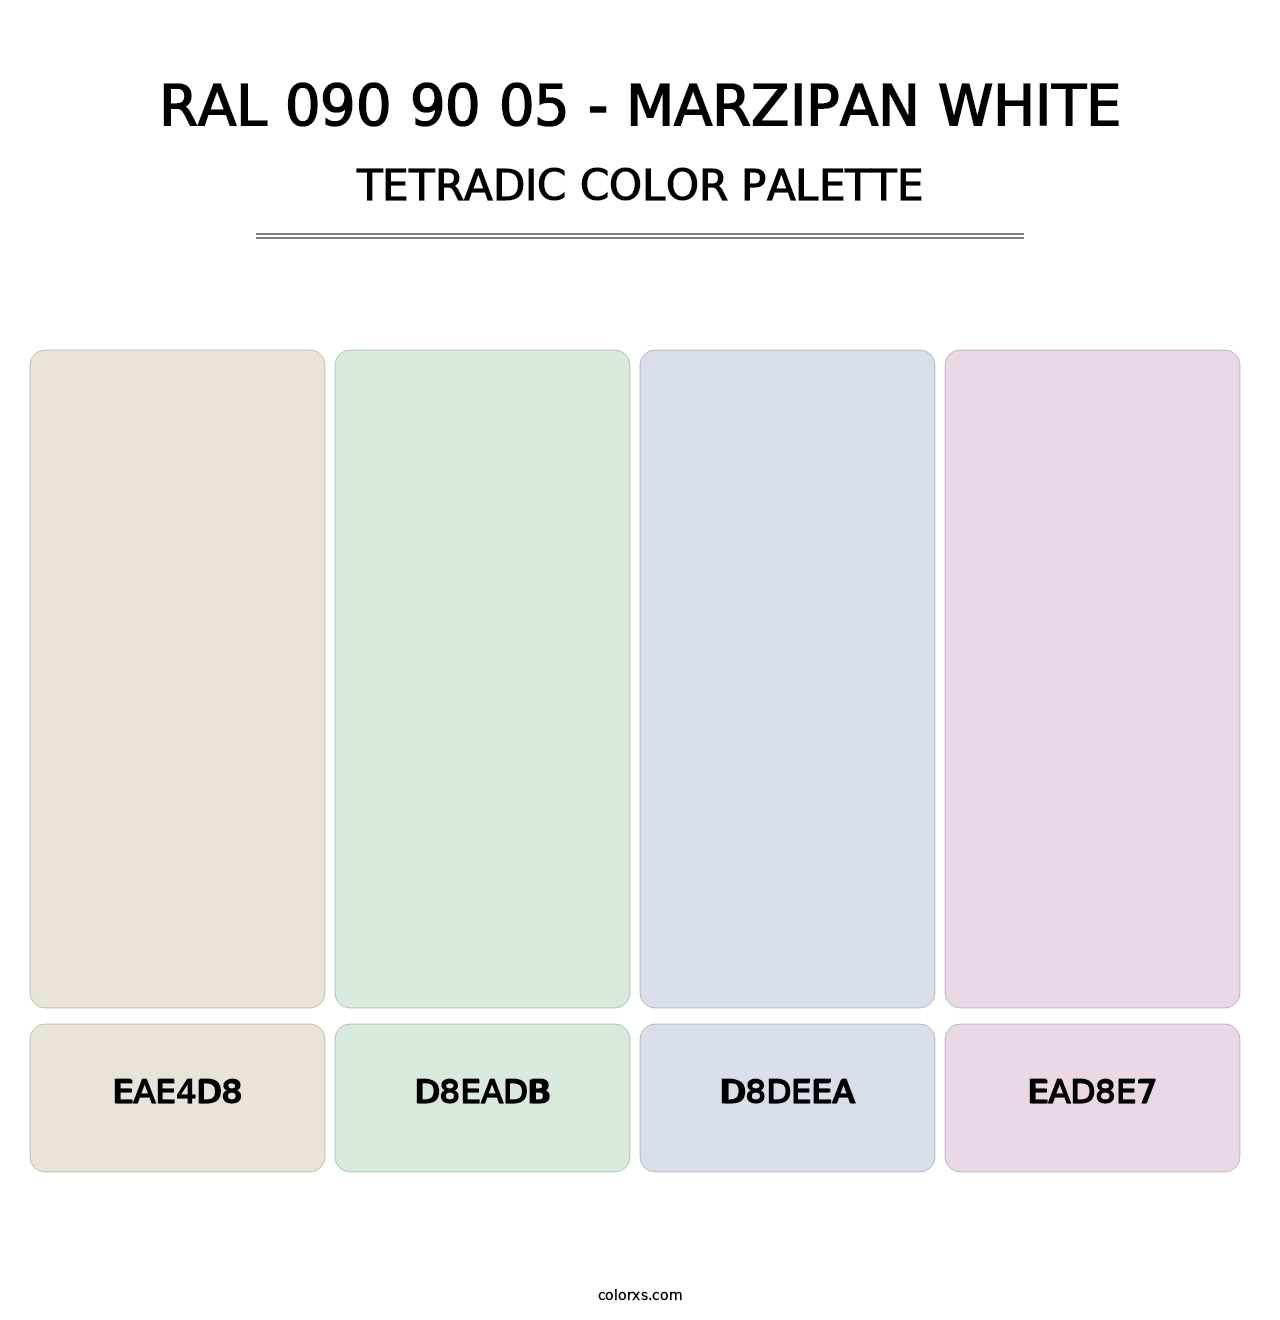 RAL 090 90 05 - Marzipan White - Tetradic Color Palette